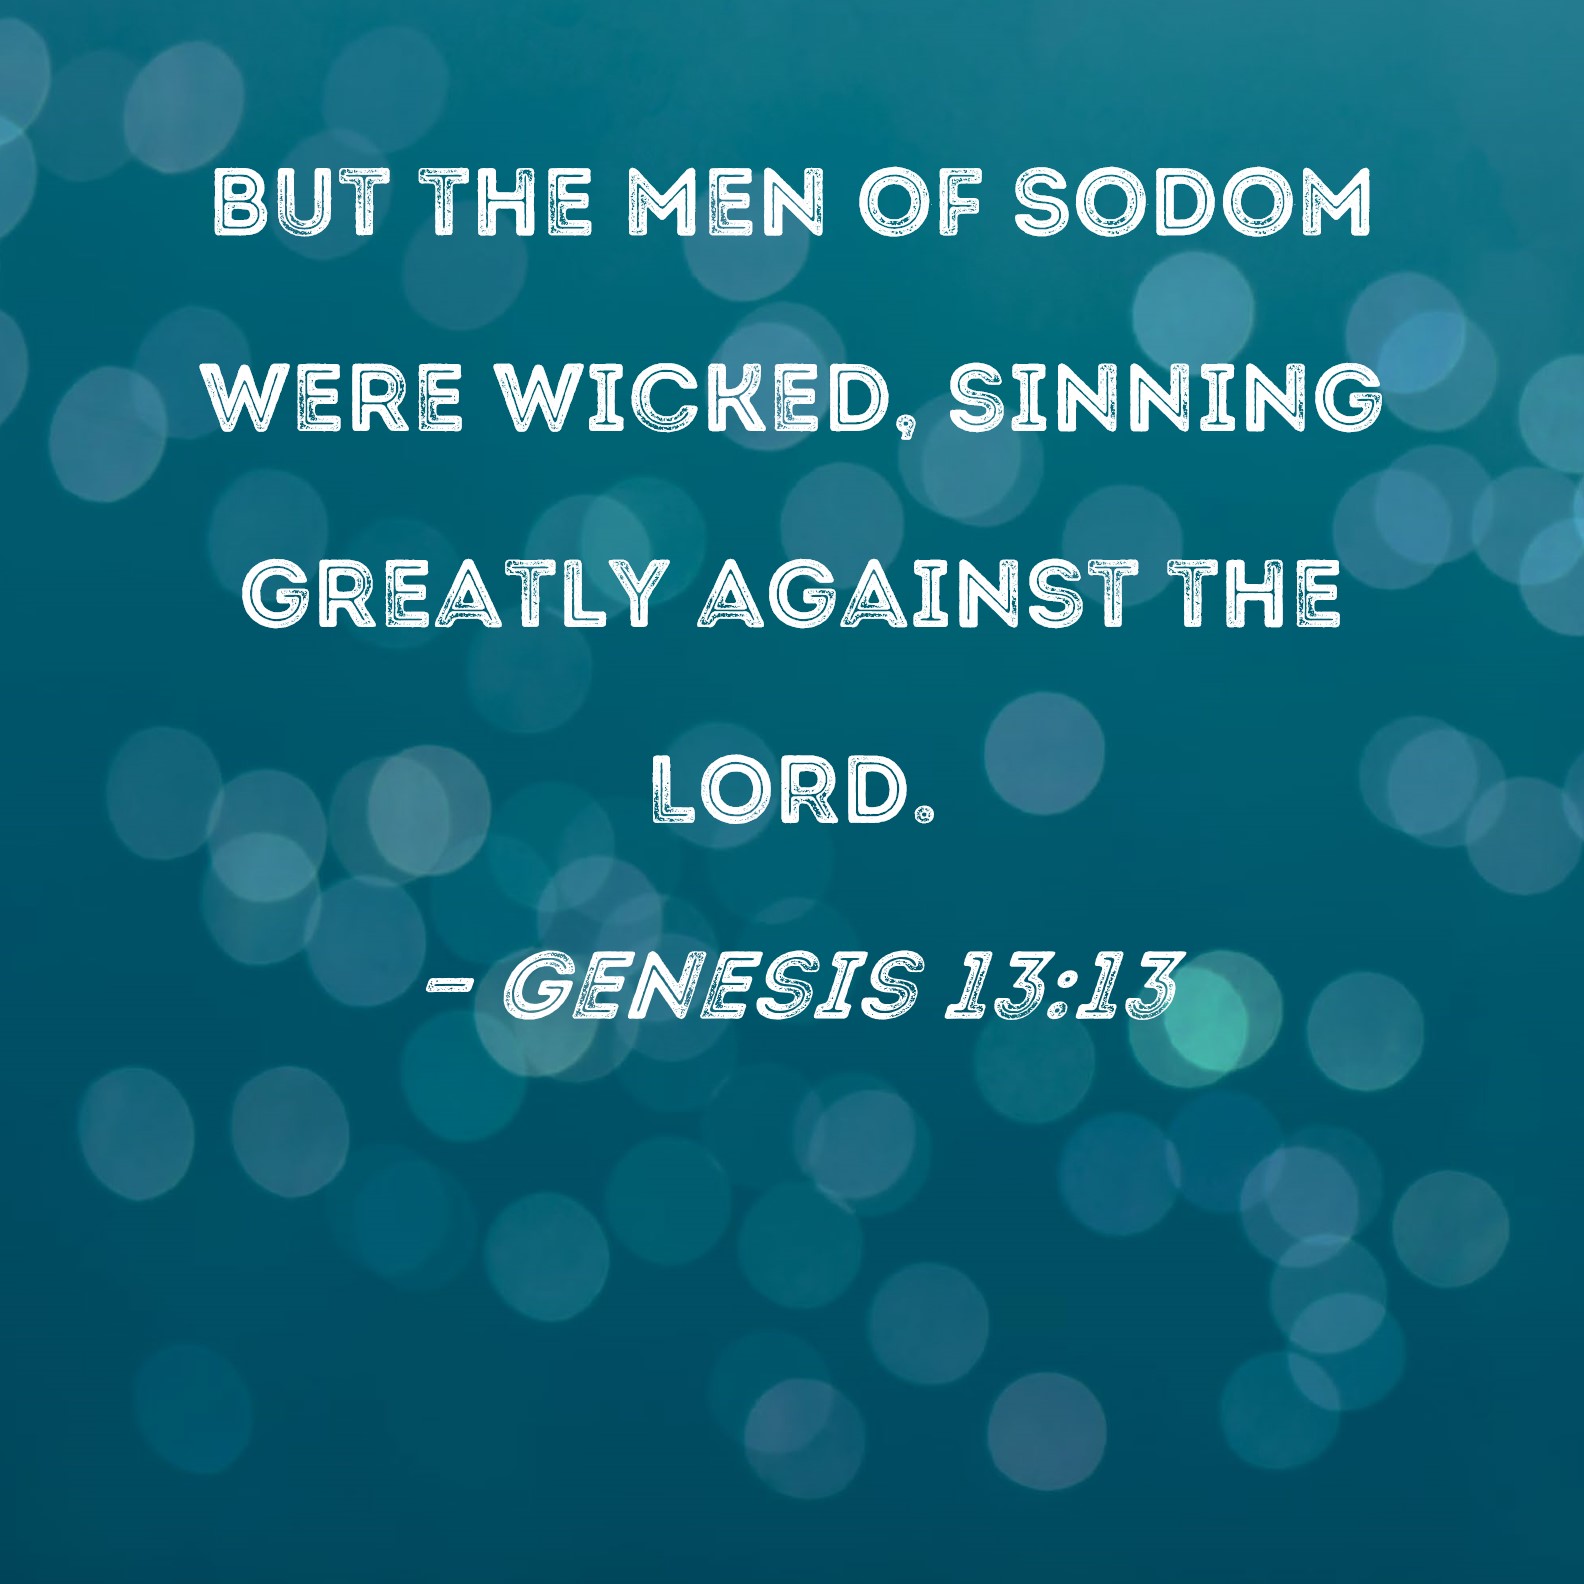 Genesis 13:13 But the men of Sodom were wicked, sinning greatly against the  LORD.